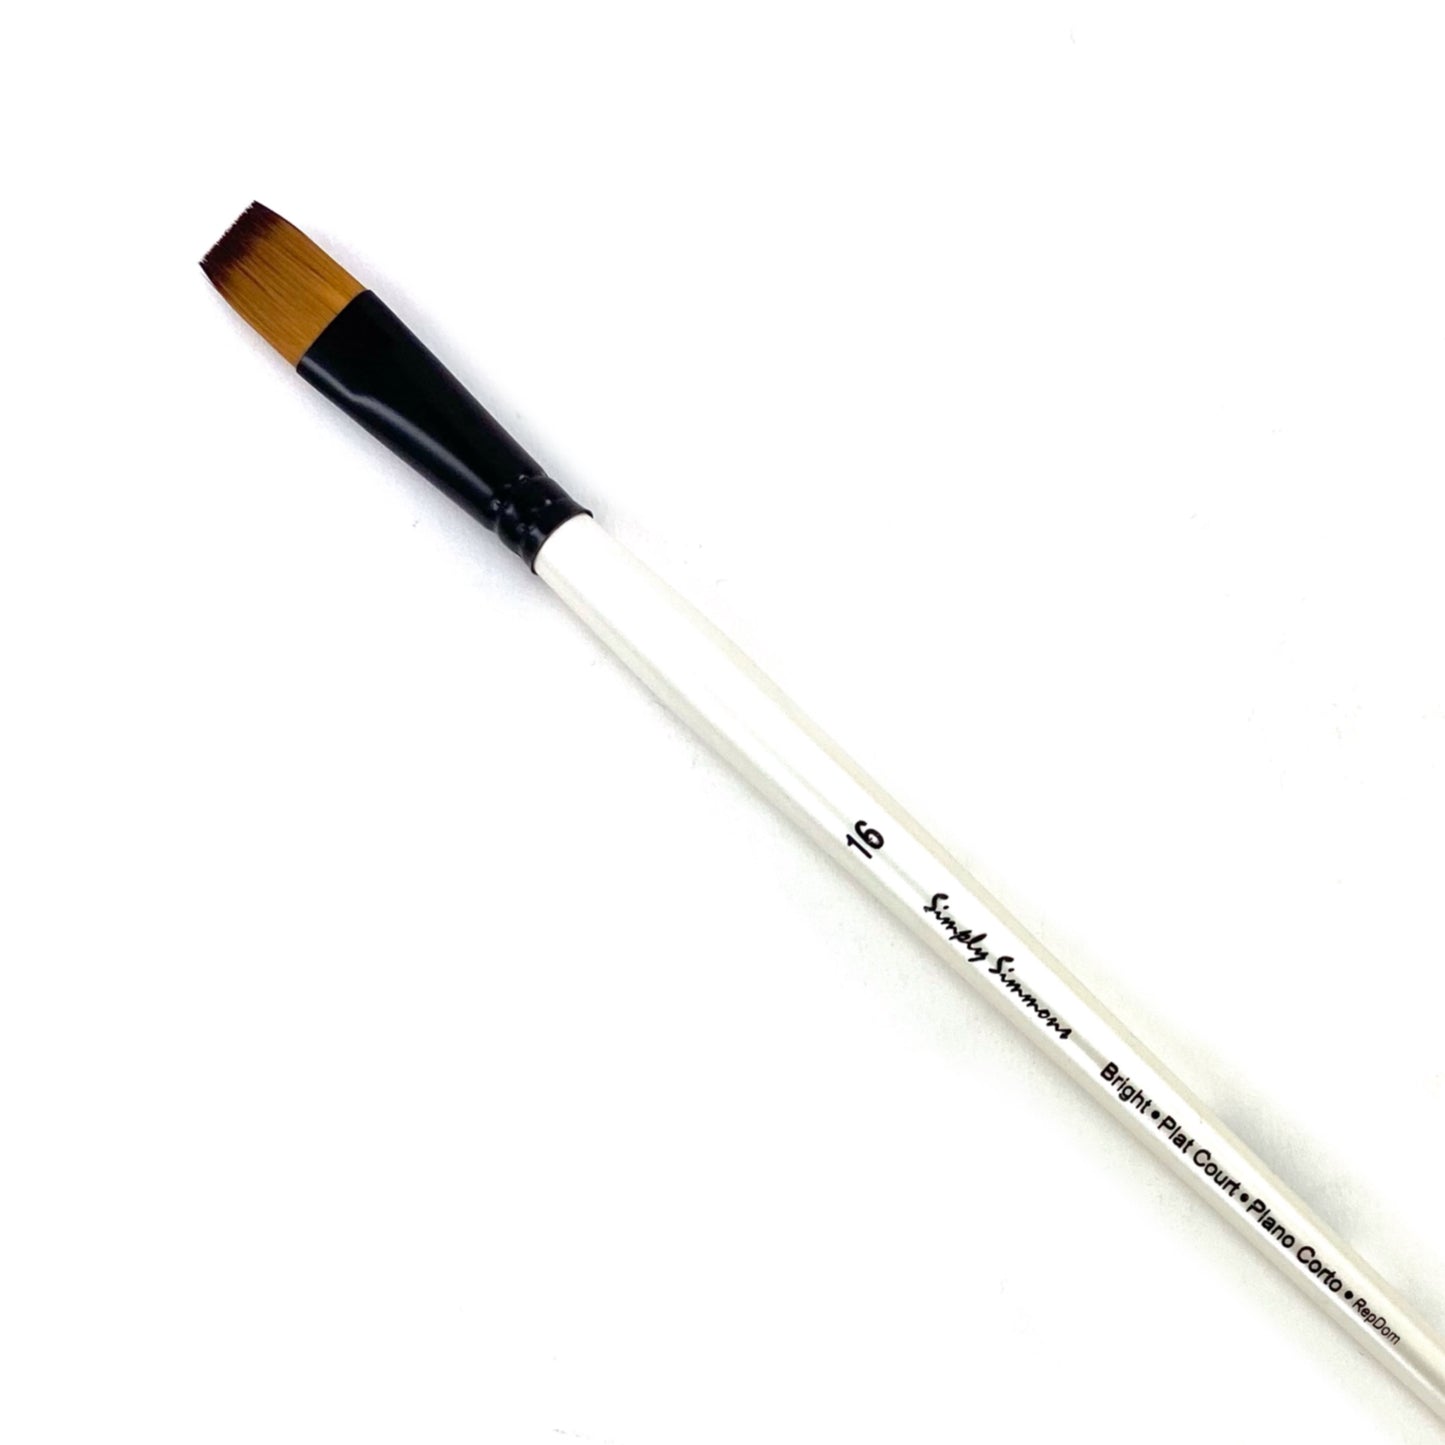 Simply Simmons All-Media Brush - Long Handle - Bright (Synthetic Bristle) / #16 by Robert Simmons - K. A. Artist Shop